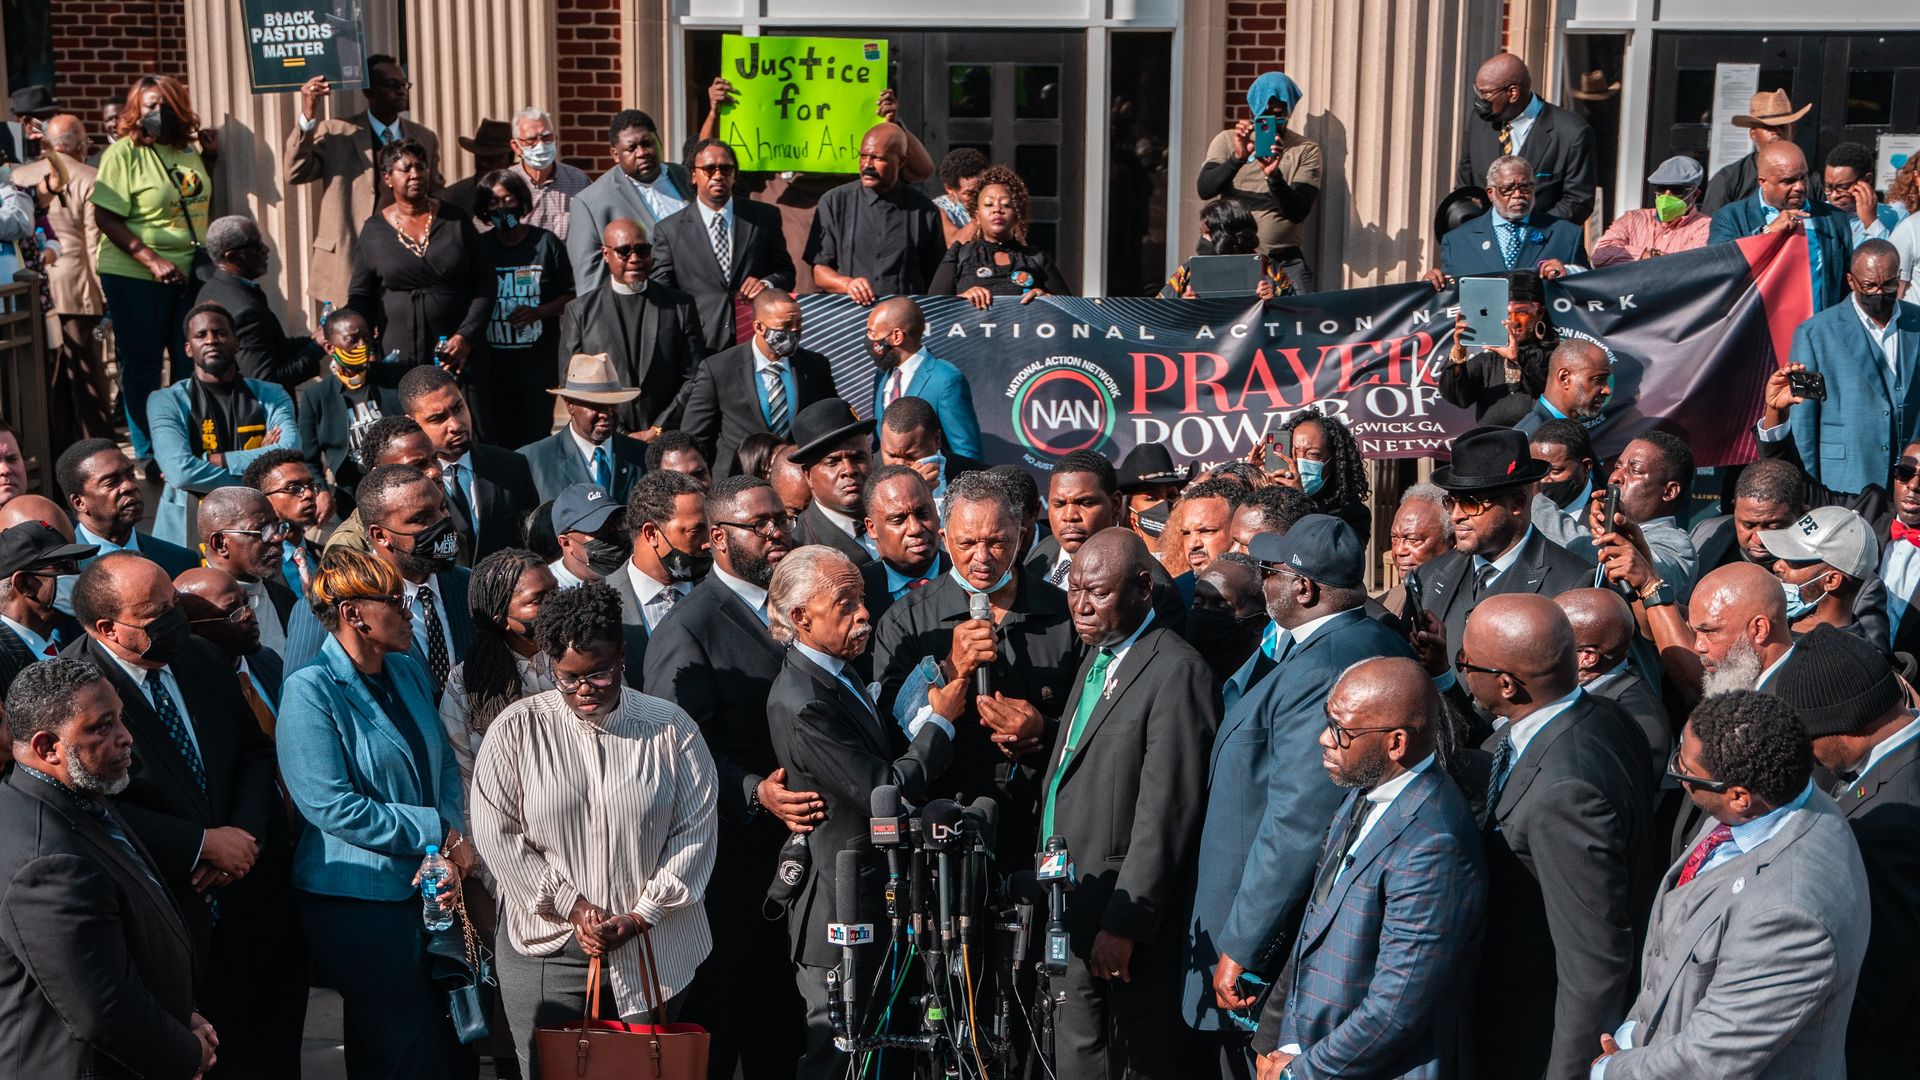 A man speaks into a microphone, surrounded by dozens of others in front of a courthouse